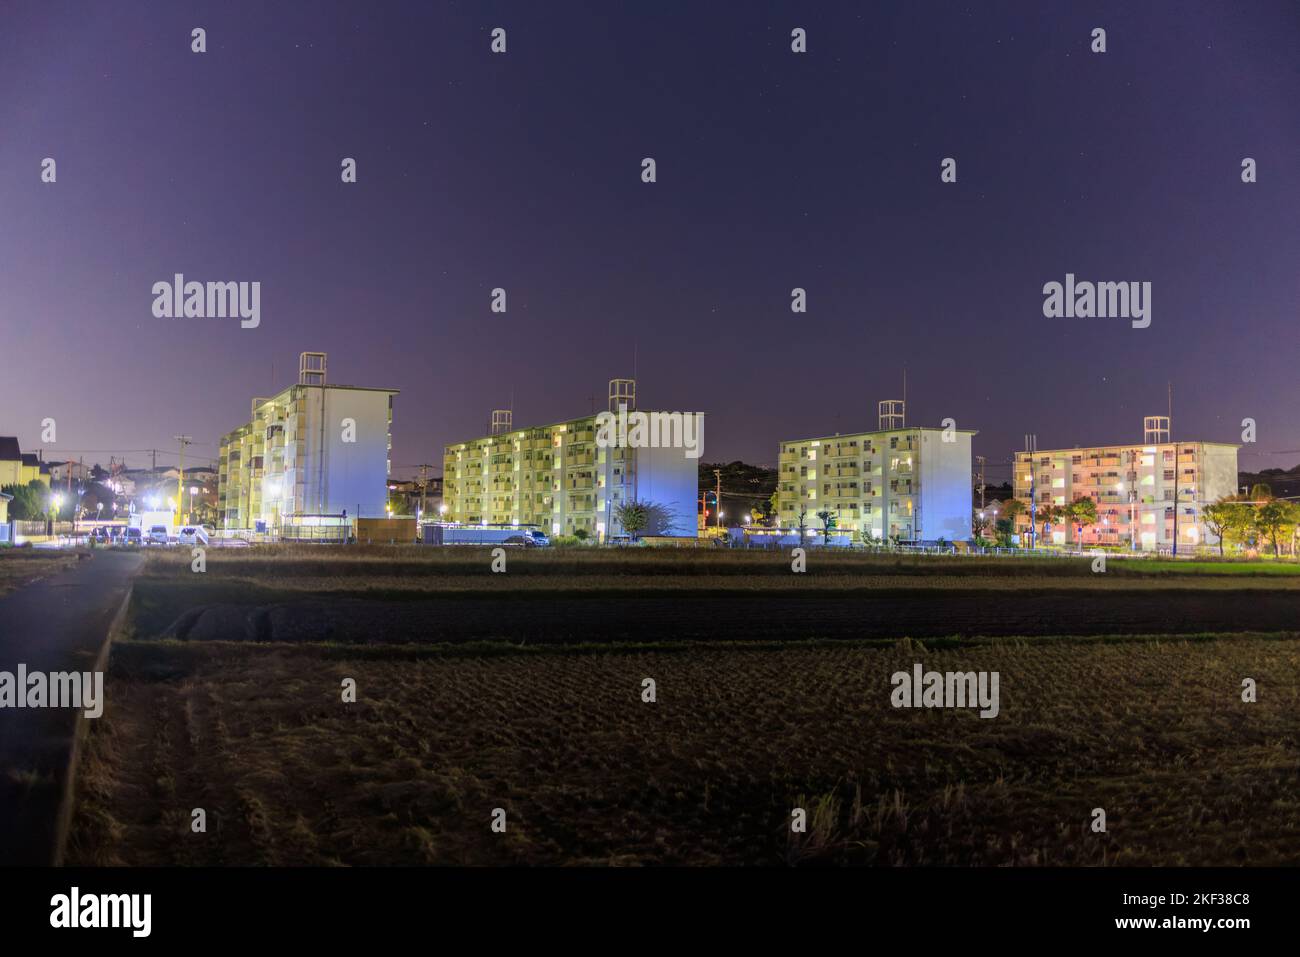 Low-rise apartment buildings next to field at night Stock Photo